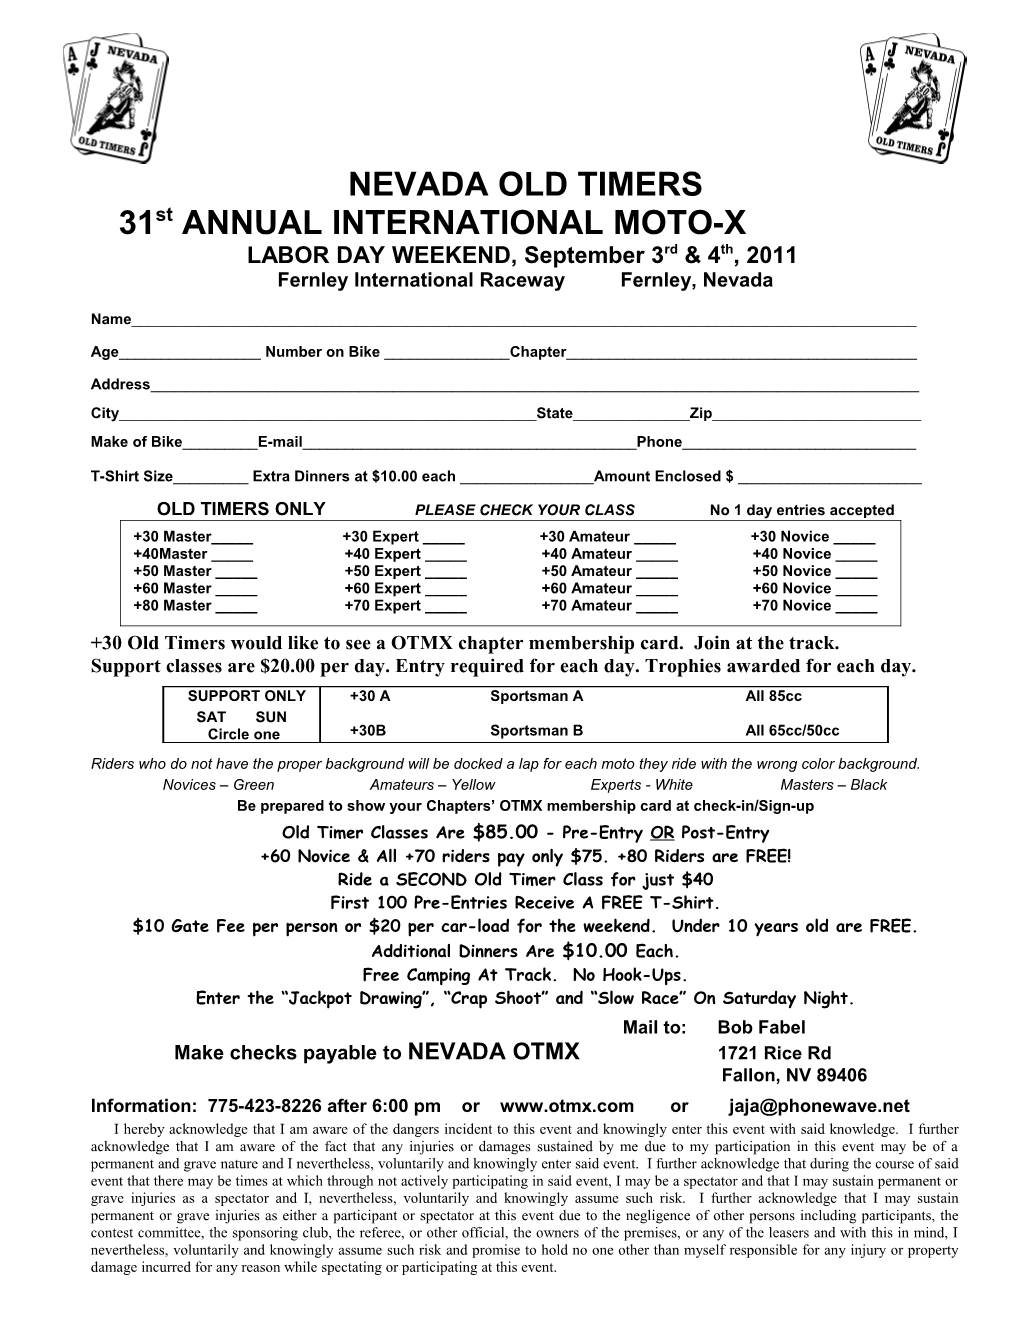 Nevada Old Timers